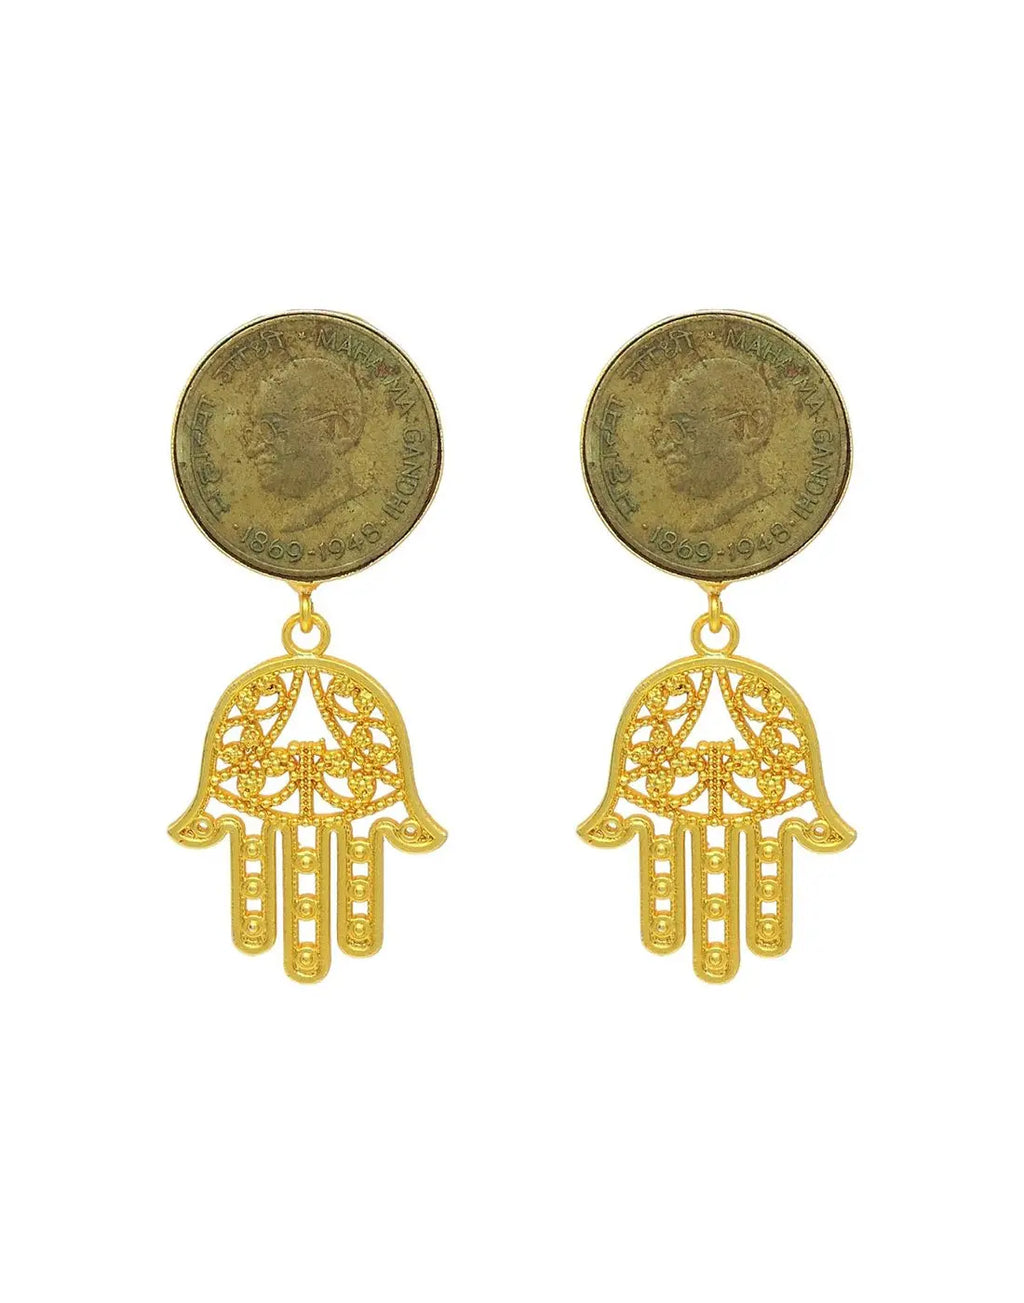 Hamsa Coin Earrings- Handcrafted Jewellery from Dori